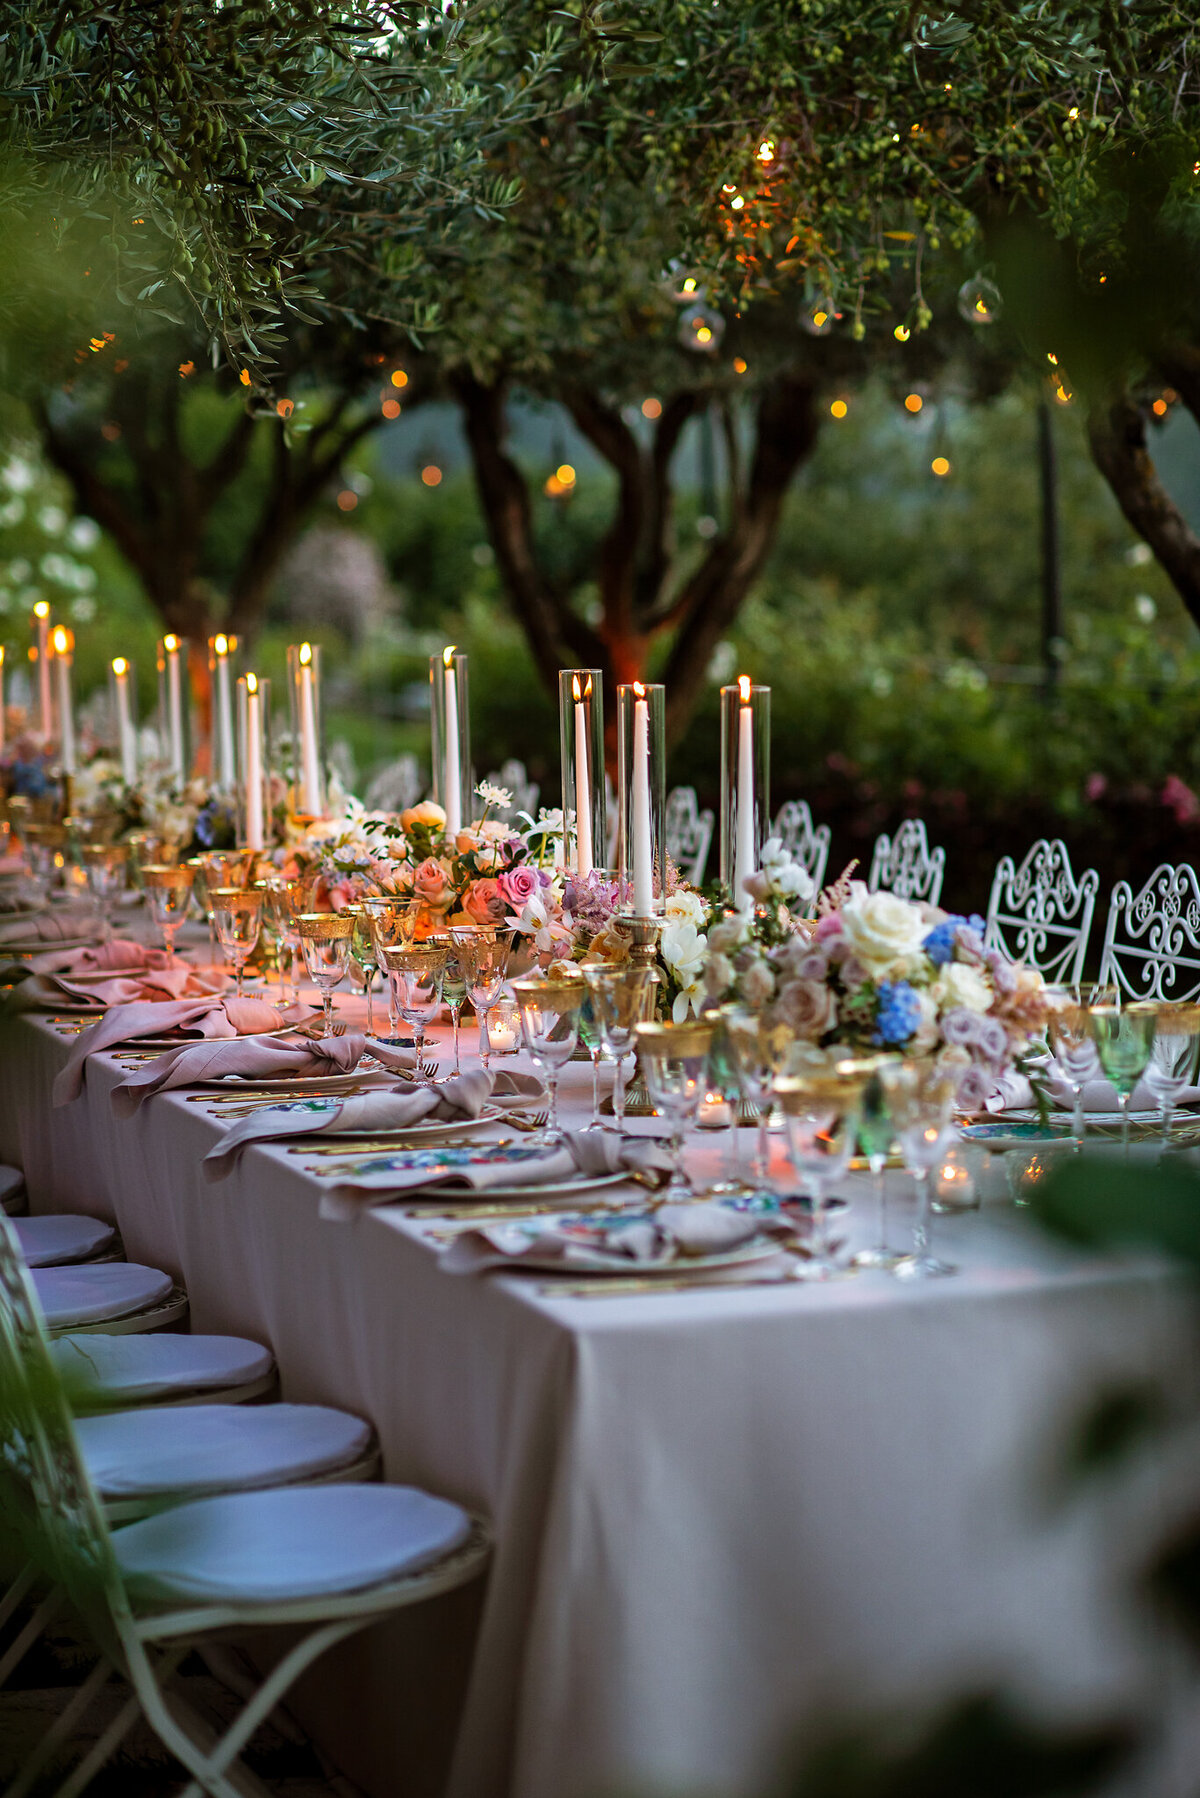 Romantic wedding table set up  for wedding in Italy